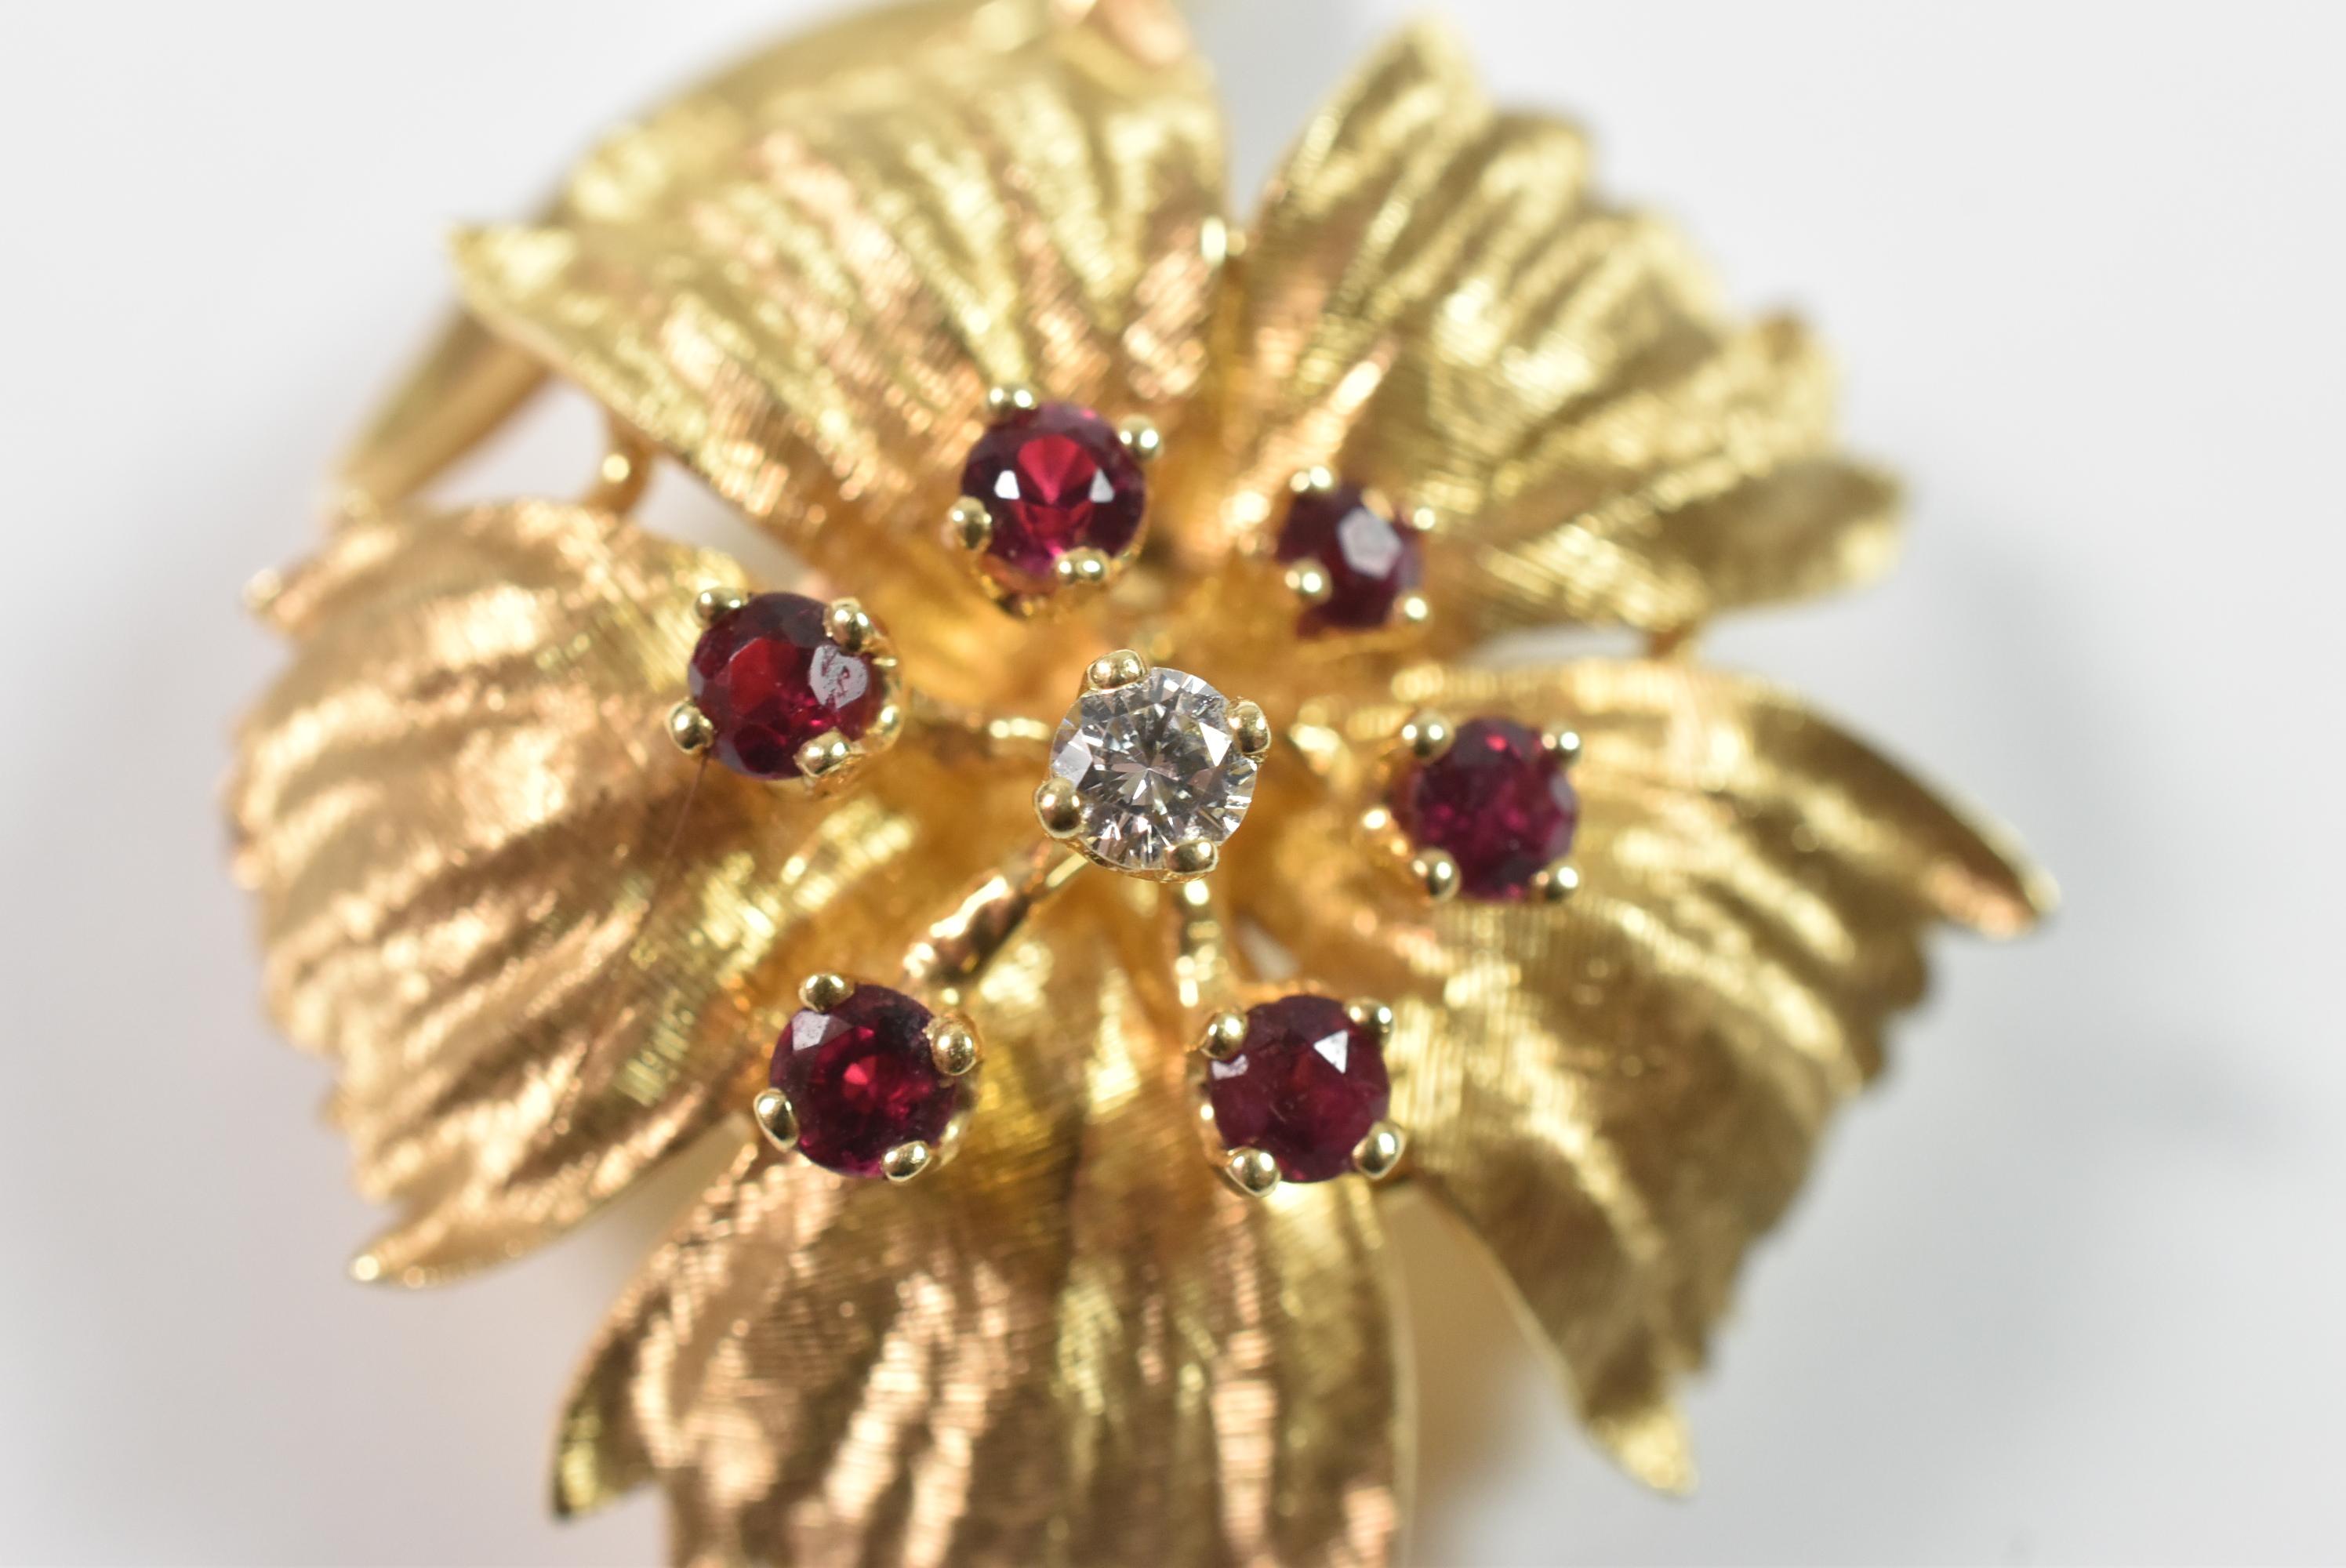 Gold floral pin stamped Dan Frere and 14K with a diamond in the center and 6 rubies. Very great condition. Dimensions: 1 7/8